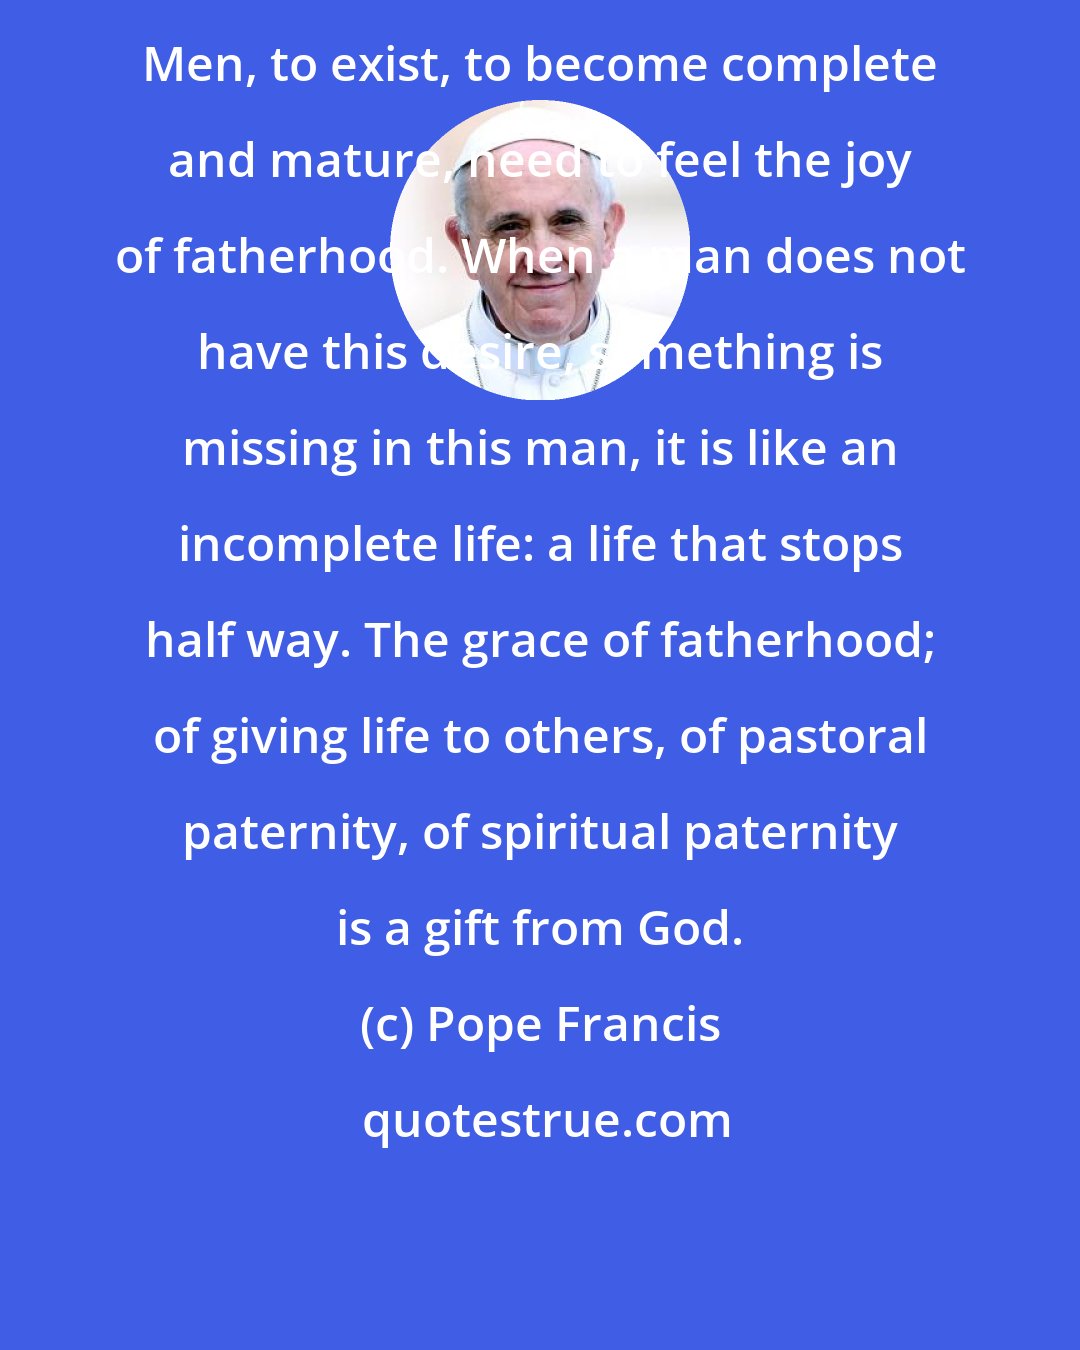 Pope Francis: Men, to exist, to become complete and mature, need to feel the joy of fatherhood. When a man does not have this desire, something is missing in this man, it is like an incomplete life: a life that stops half way. The grace of fatherhood; of giving life to others, of pastoral paternity, of spiritual paternity is a gift from God.